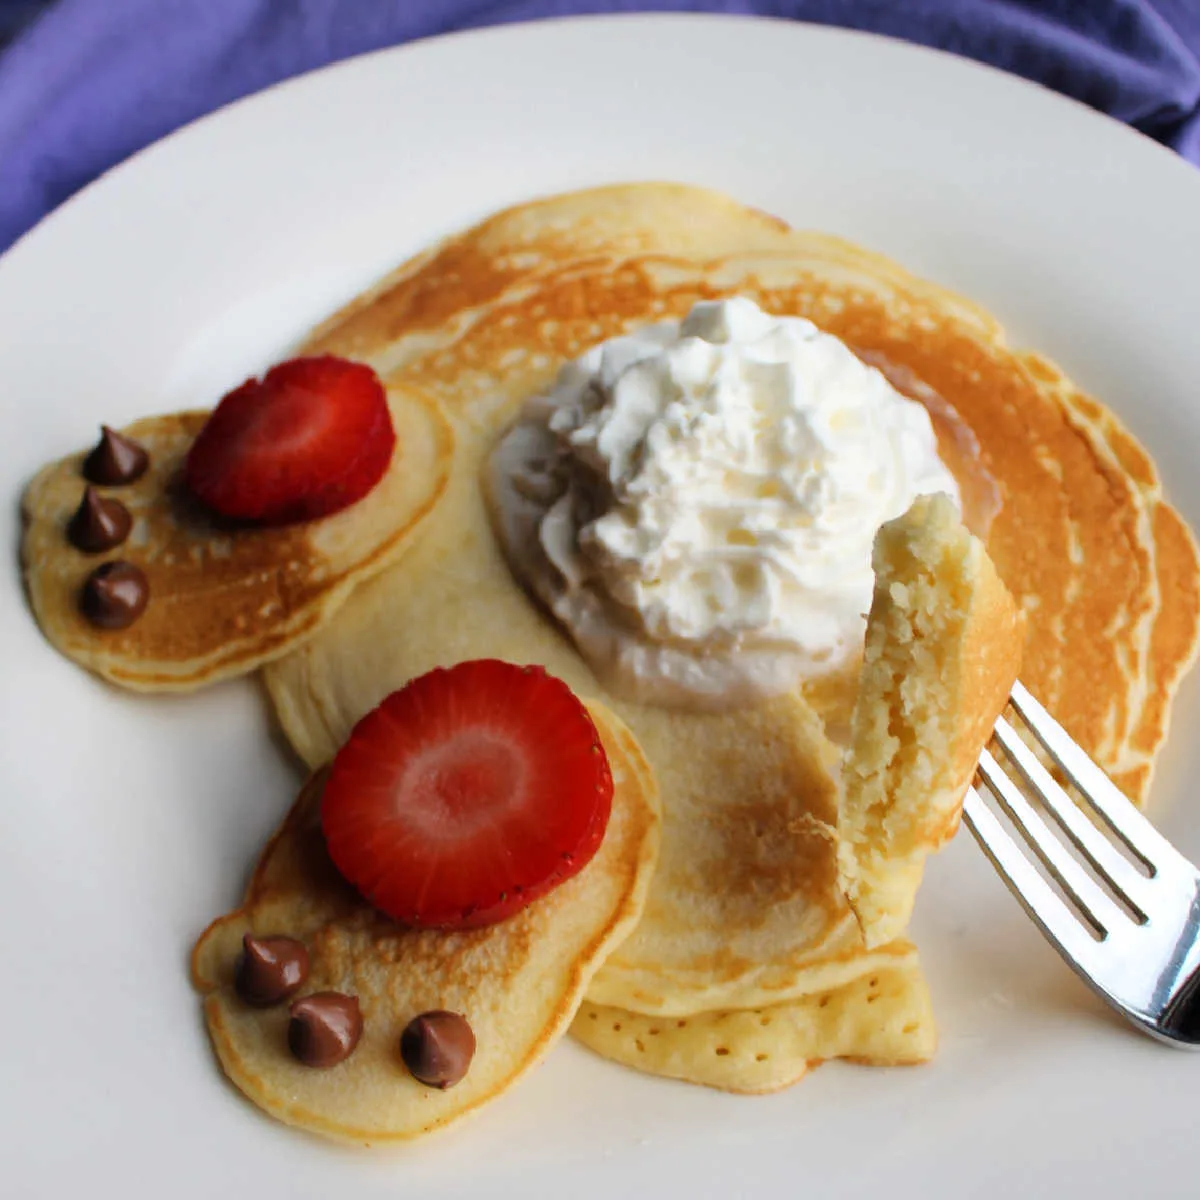 close up showing texture of homemade pancakes with bite on fork, whipped cream bunny tail and strawberry and chocolate chip bunny feet decorations visible in background.